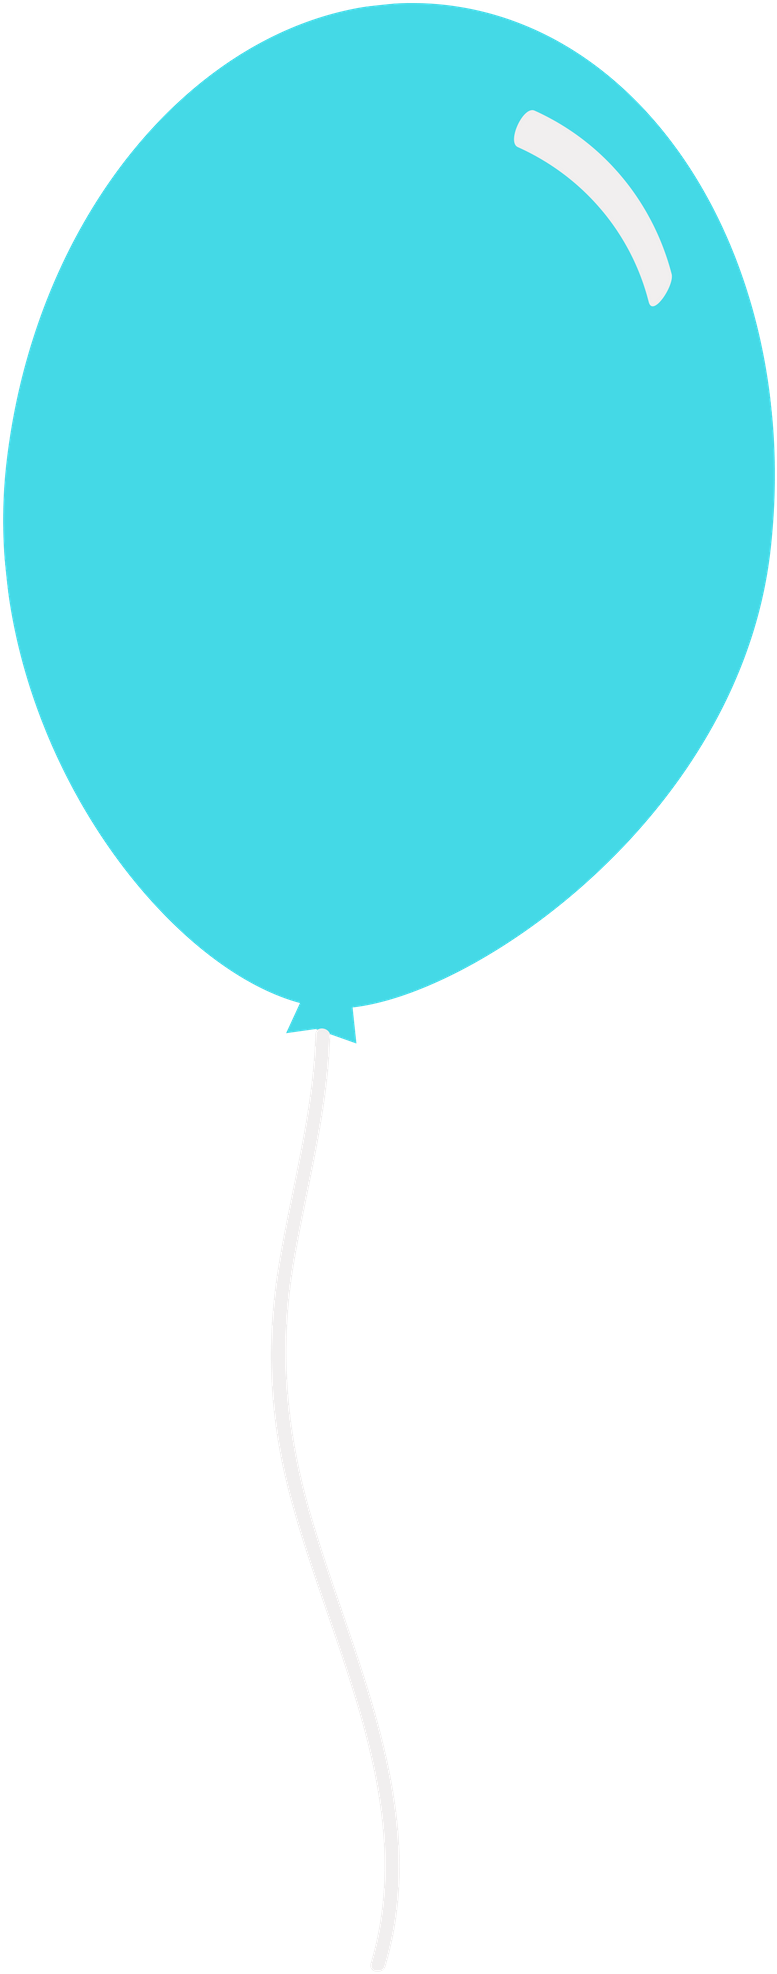 A Blue Balloon With A White String